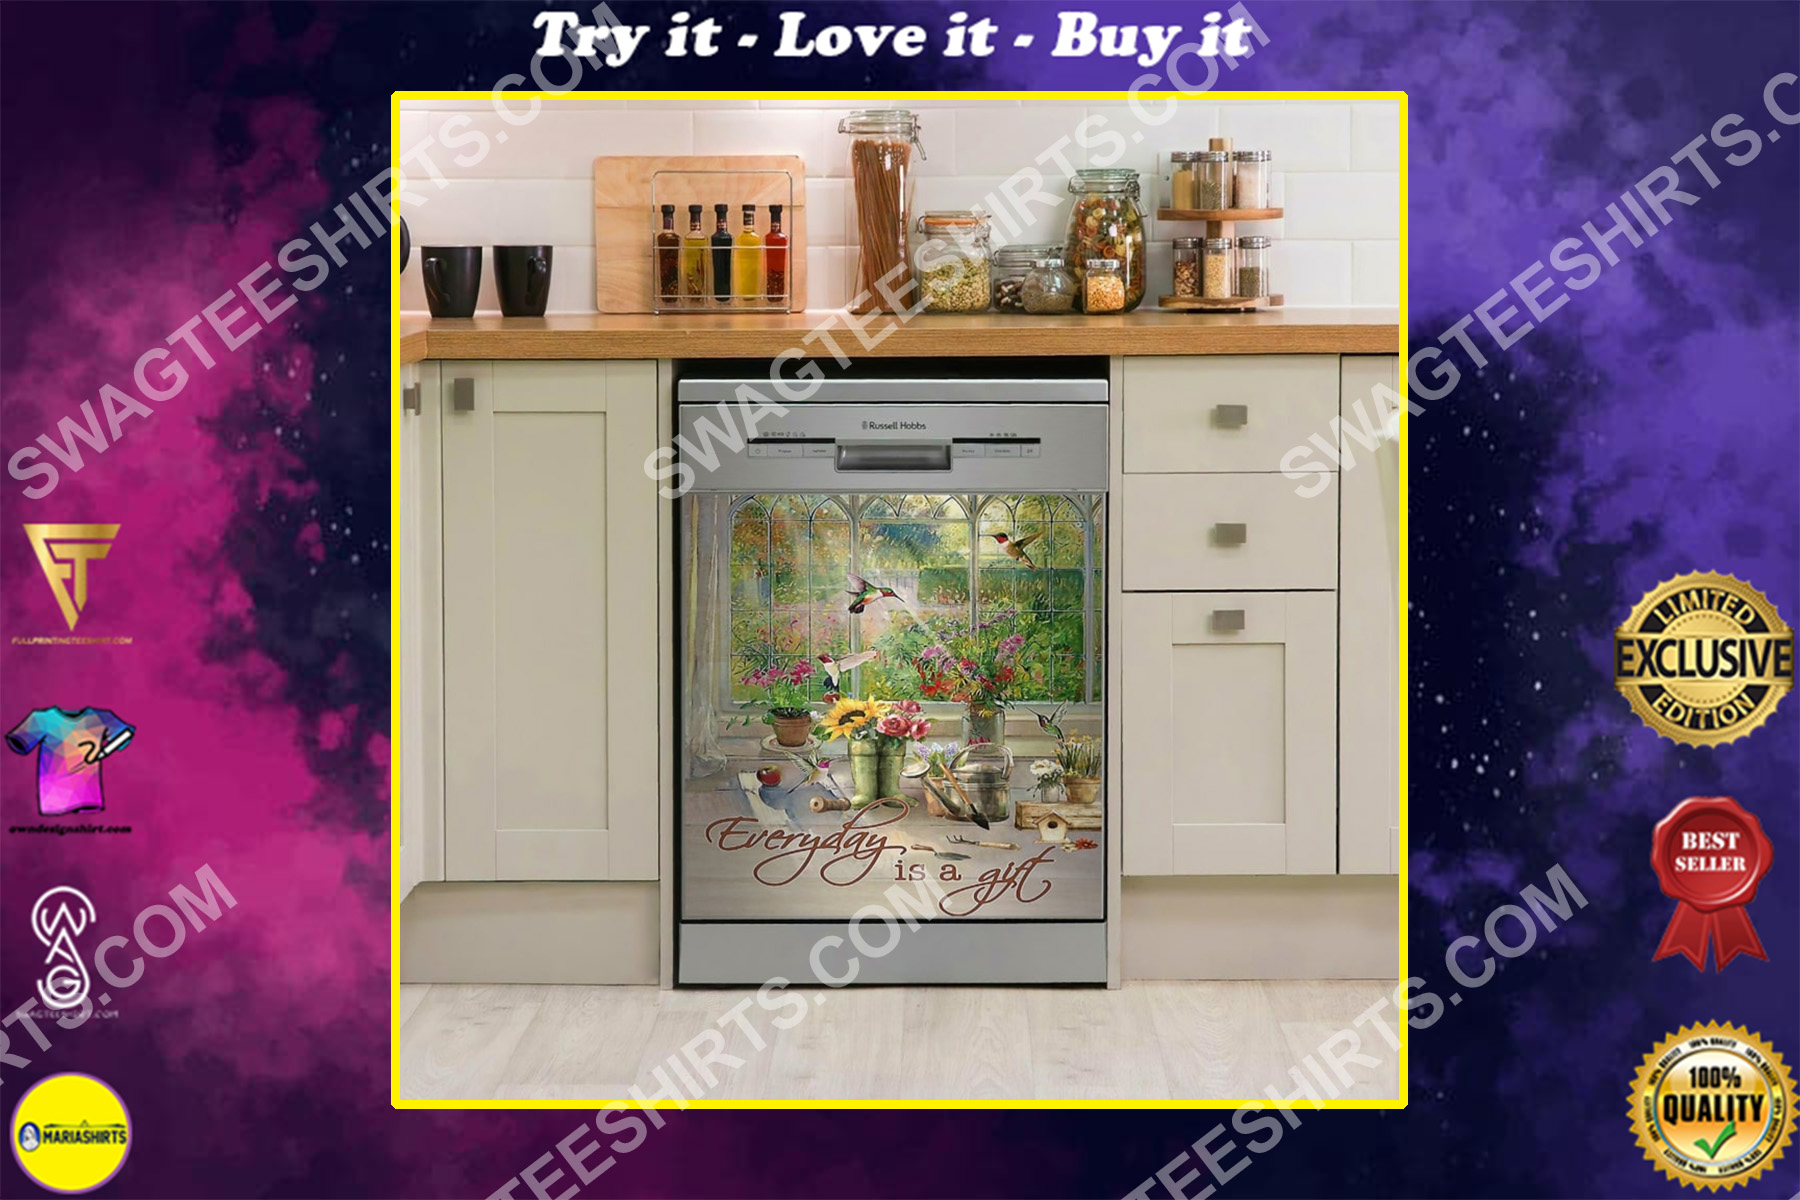 everyday is a gift vintage kitchen decorative dishwasher magnet cover